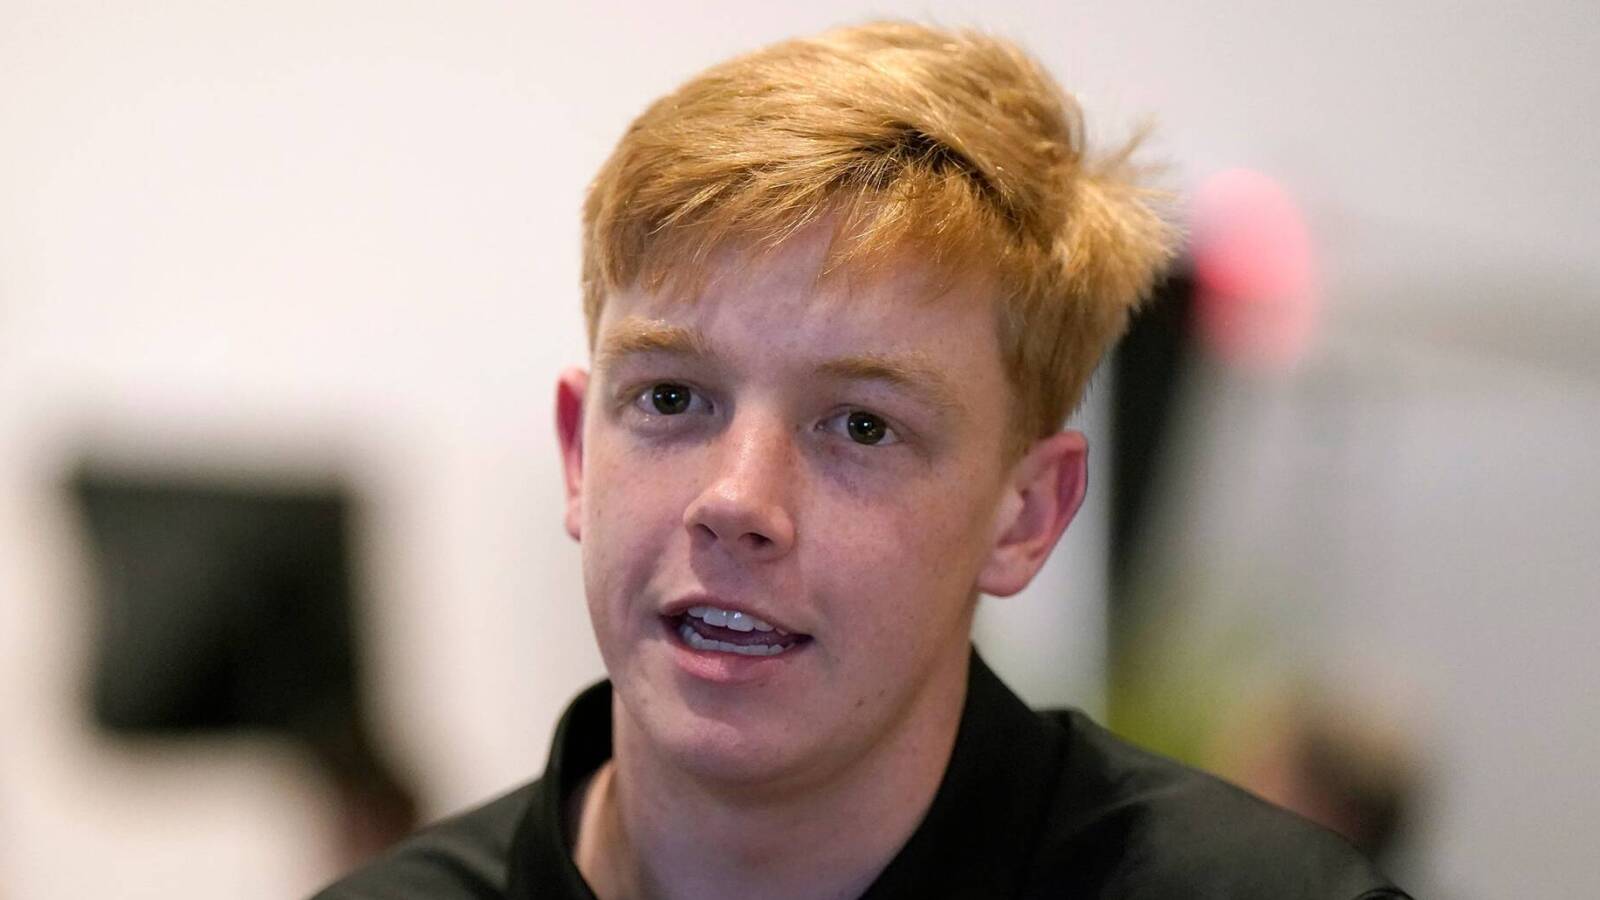 17-year-old racing phenom wins pole for NASCAR Truck Series debut